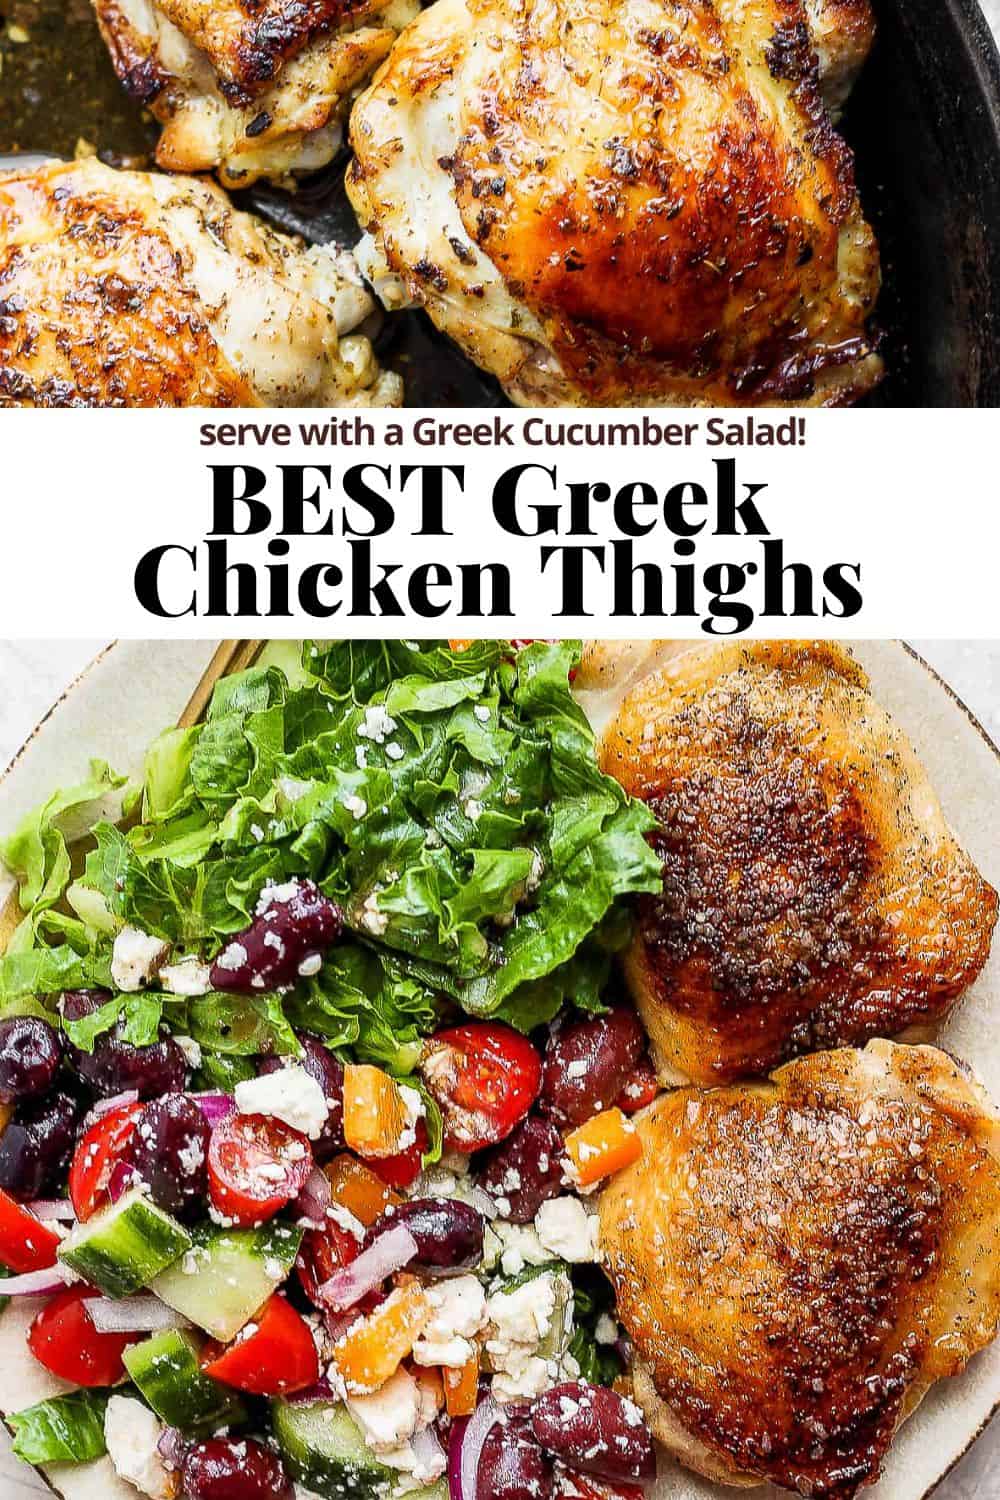 Pinterest image showing a close up of greek chicken thighs cooking in a cast iron skillet, the recipe name, and then two fully cooked and marinated chicken thighs on a plate alongside greek cucumber salad.